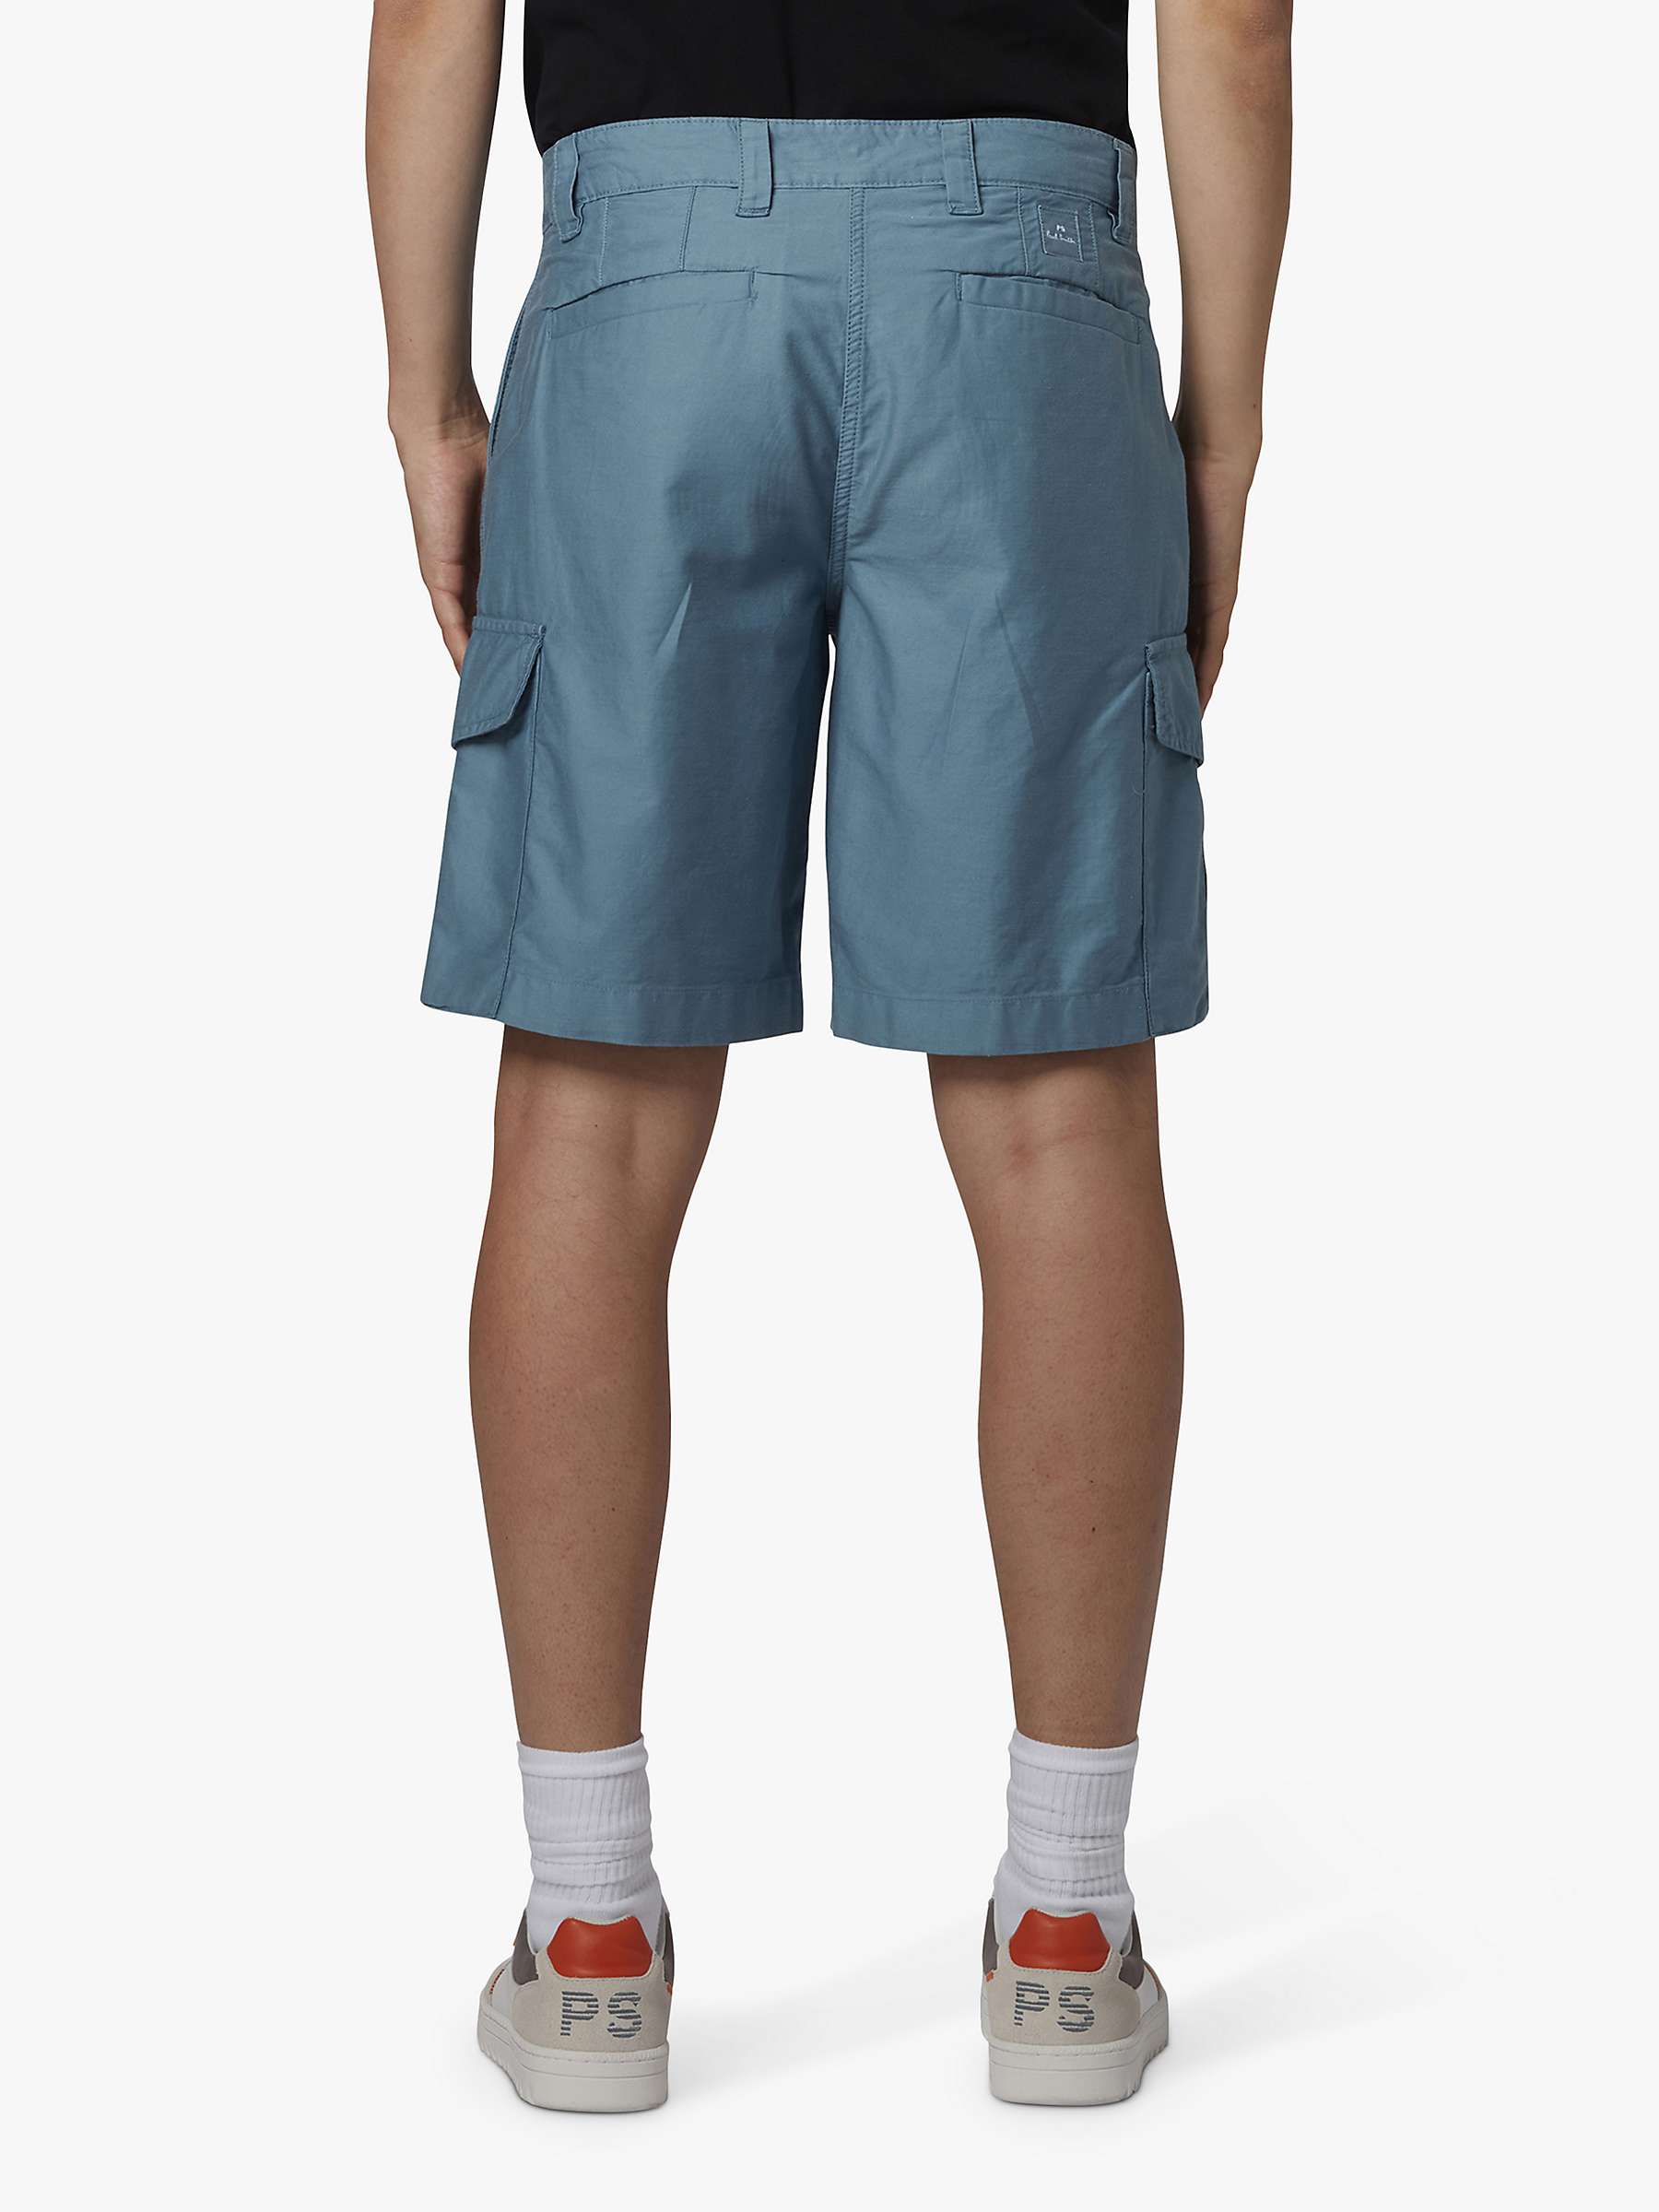 Buy PS Paul Smith Cargo Shorts, Blue Online at johnlewis.com